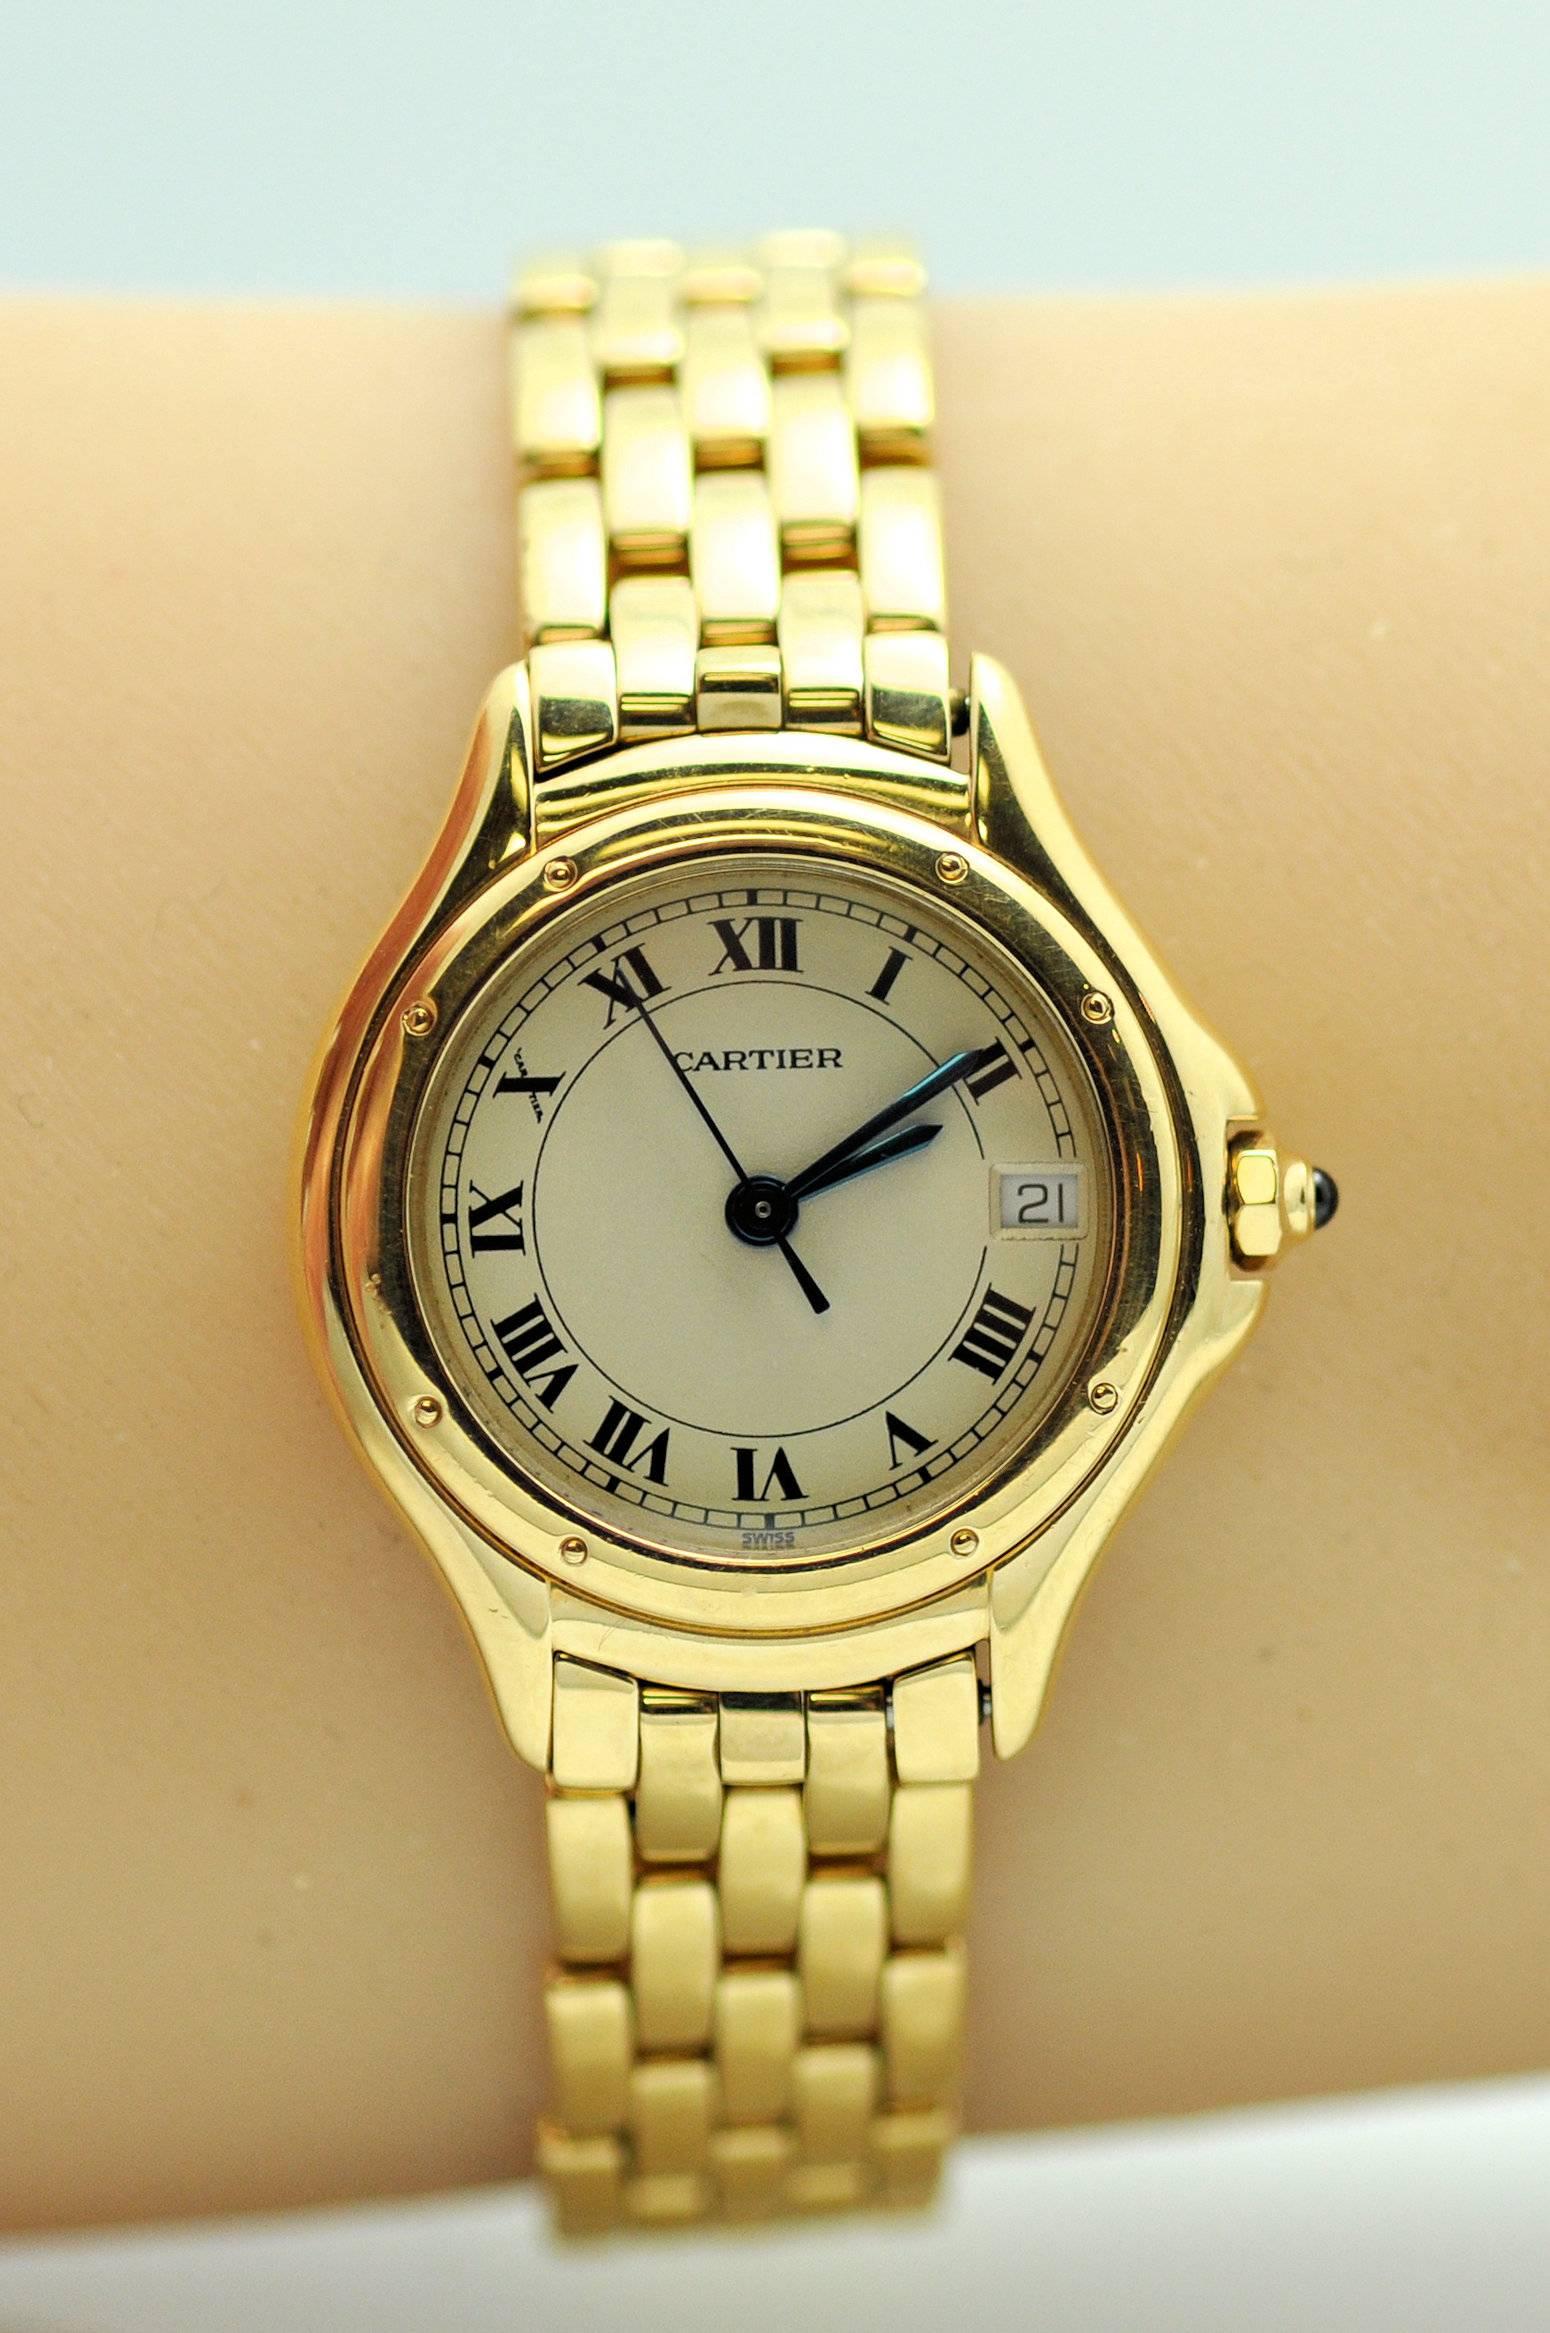 18 Karat yellow gold lady's Cougar model wrist watch.  Cream color dial with Roman numerals and date.  Synthetic sapphire dial.  Quartz. Double deployant clasp. Watch length can be reduced. 